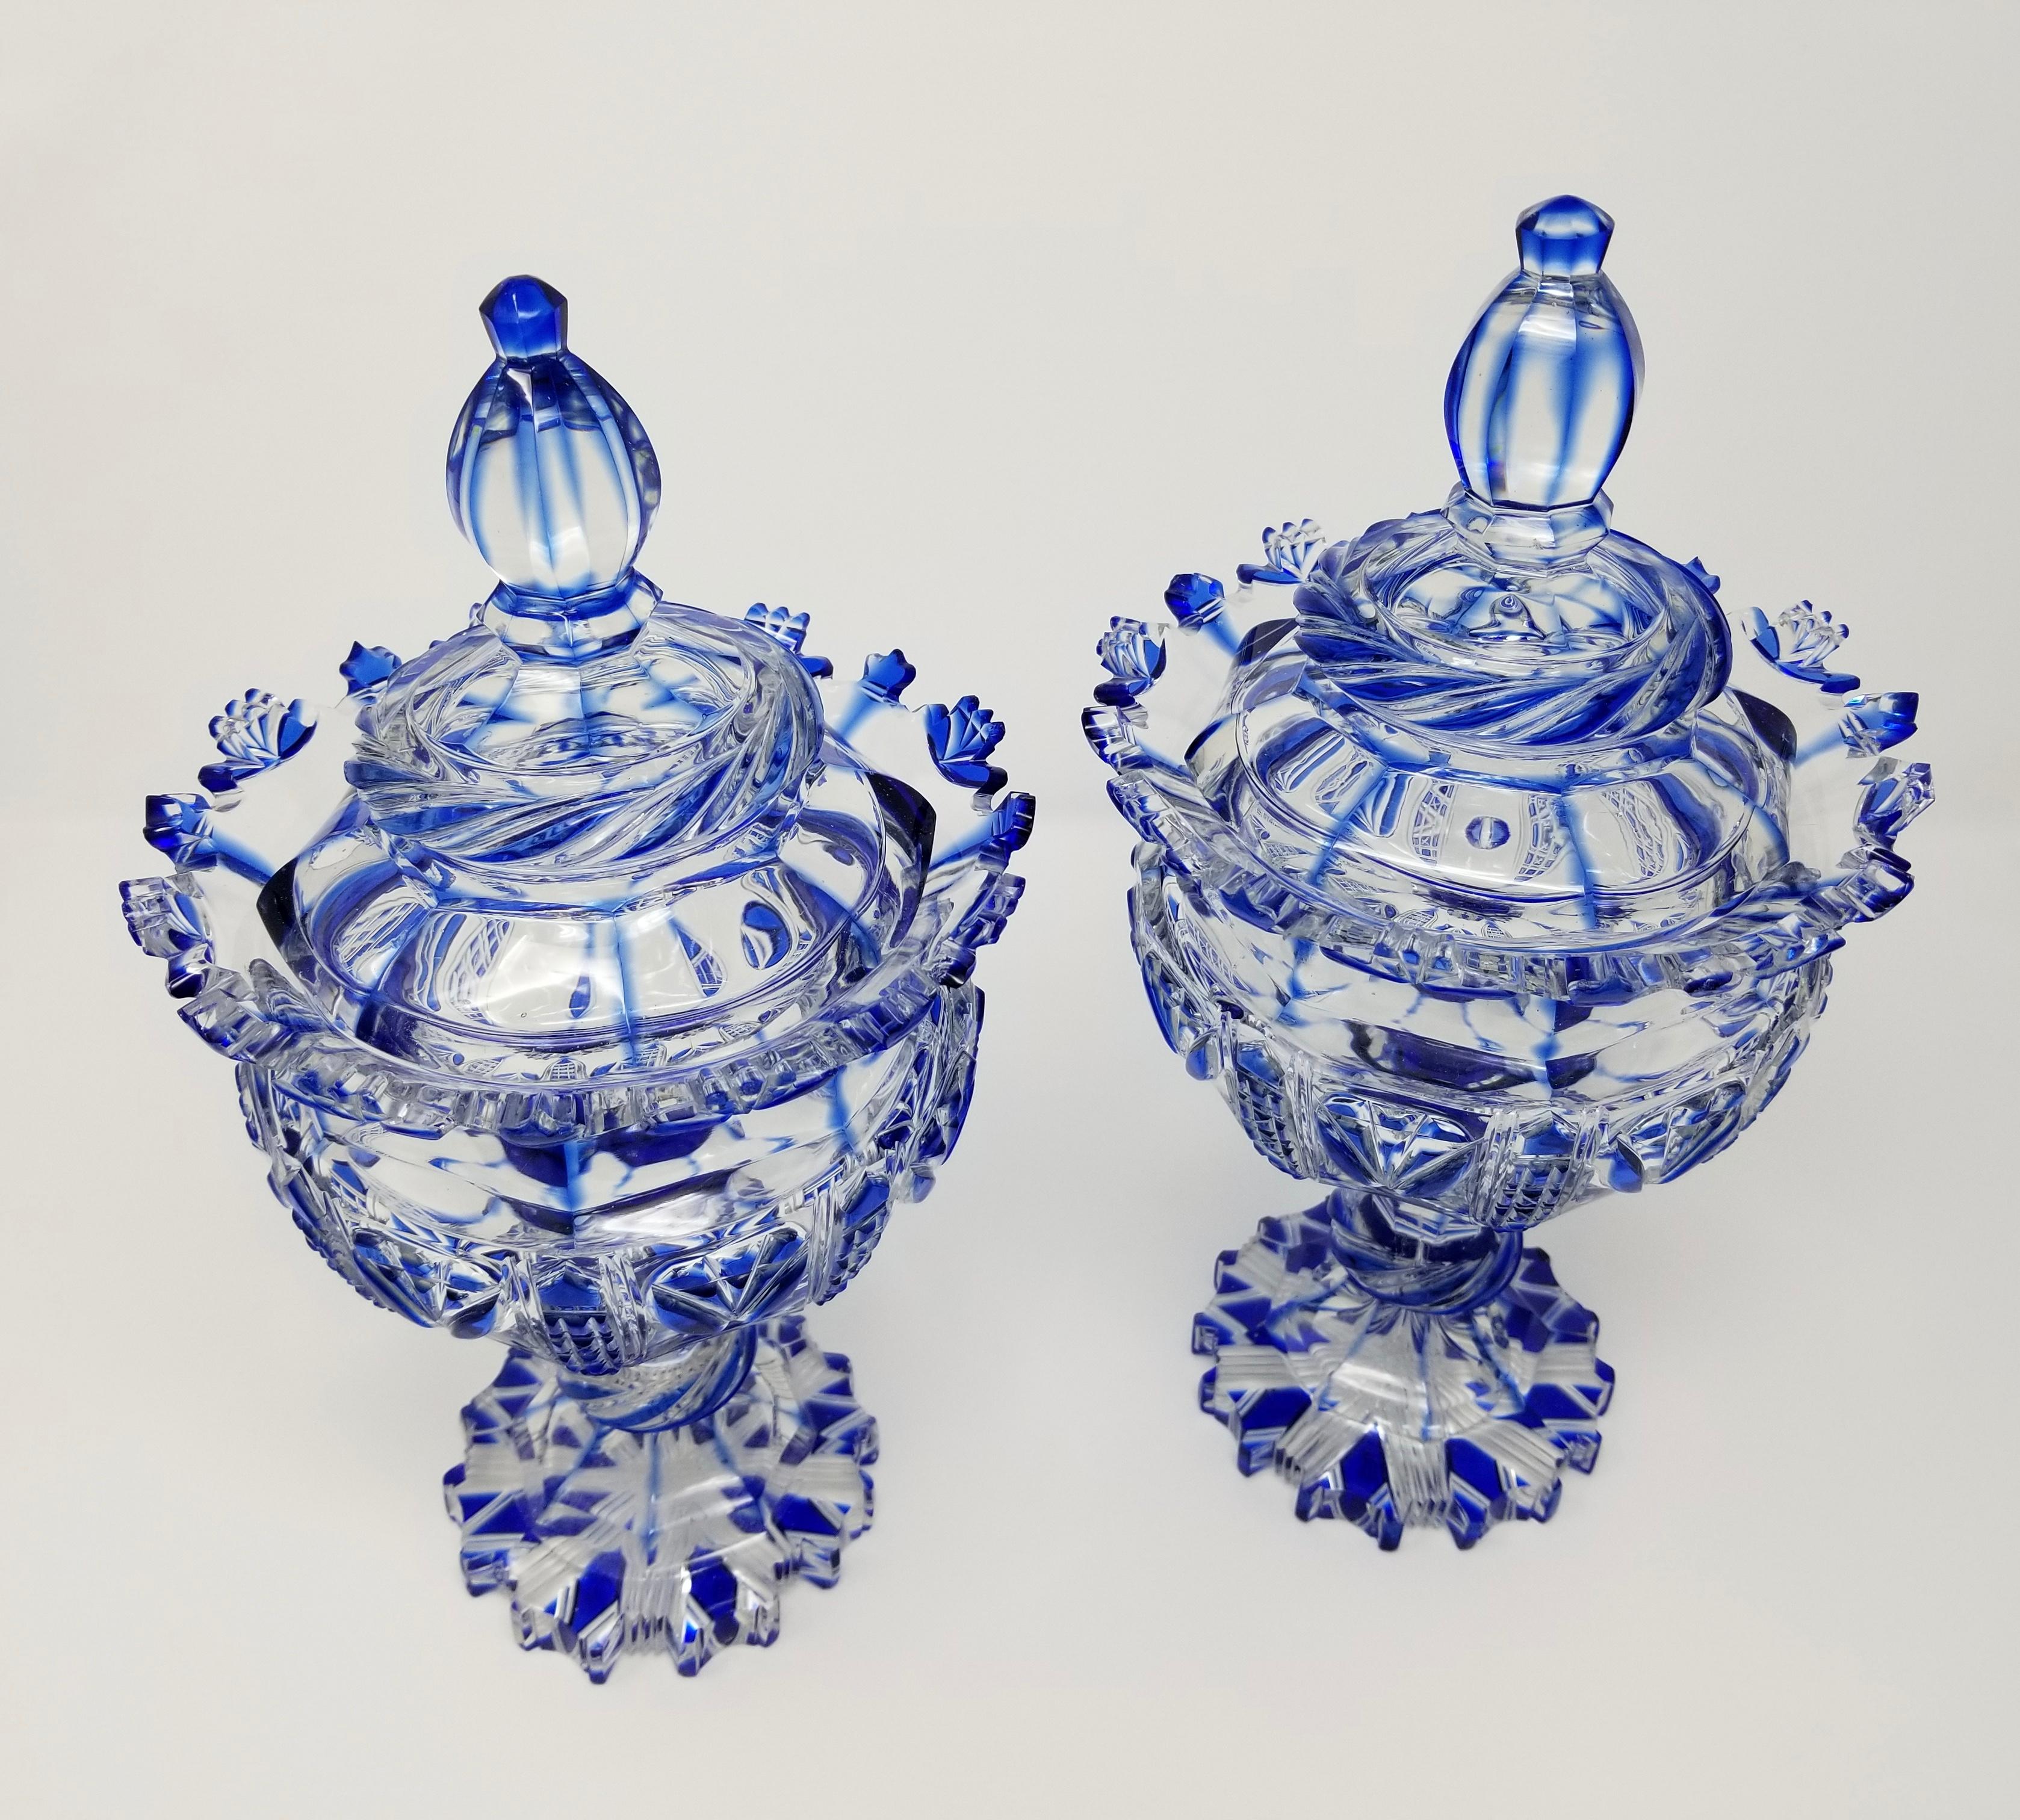 A Beautiful pair of 19th century Louis XVI style Russian cobalt blue hand-diamond cut to clear crystal covered urns/vases, attributed to Imperial Russian glass manufacturing. Each urn is beautifully hand-diamond cut with two layers of crystal, which